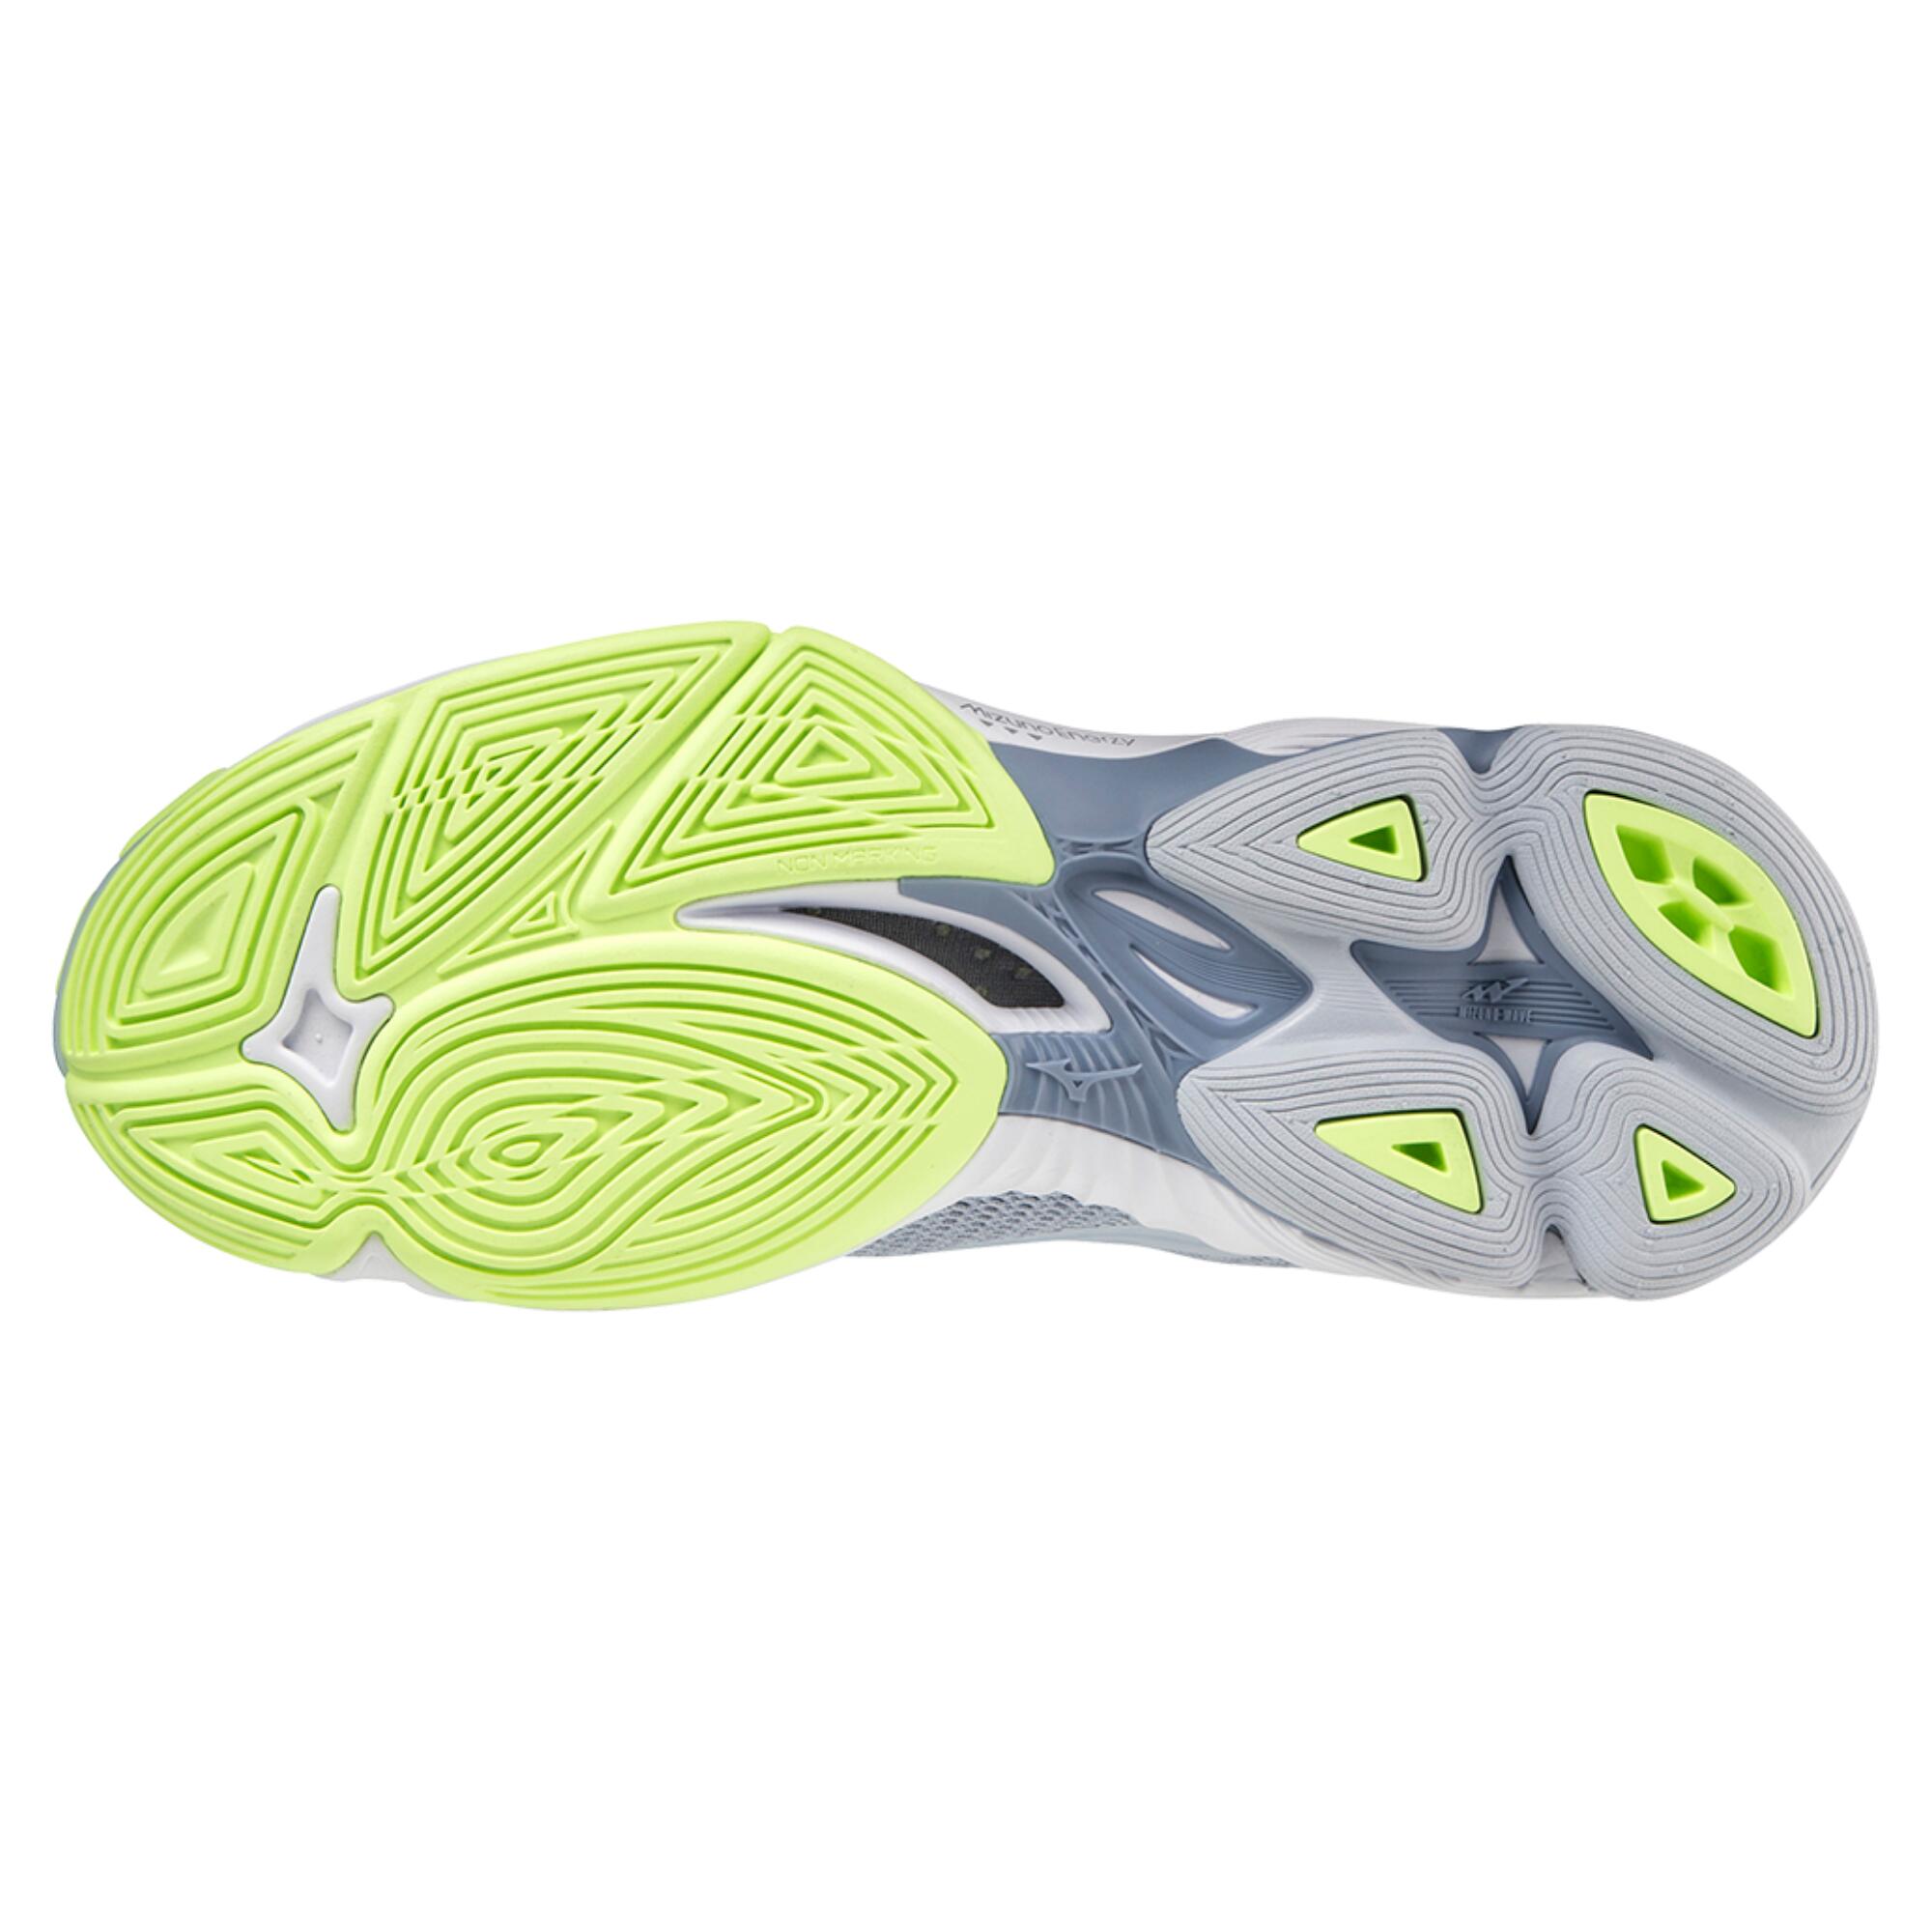 WOMEN'S VOLLEYBALL SHOES MIZUNO LIGHTNING Z7 LOW GREY - LIME 3/5